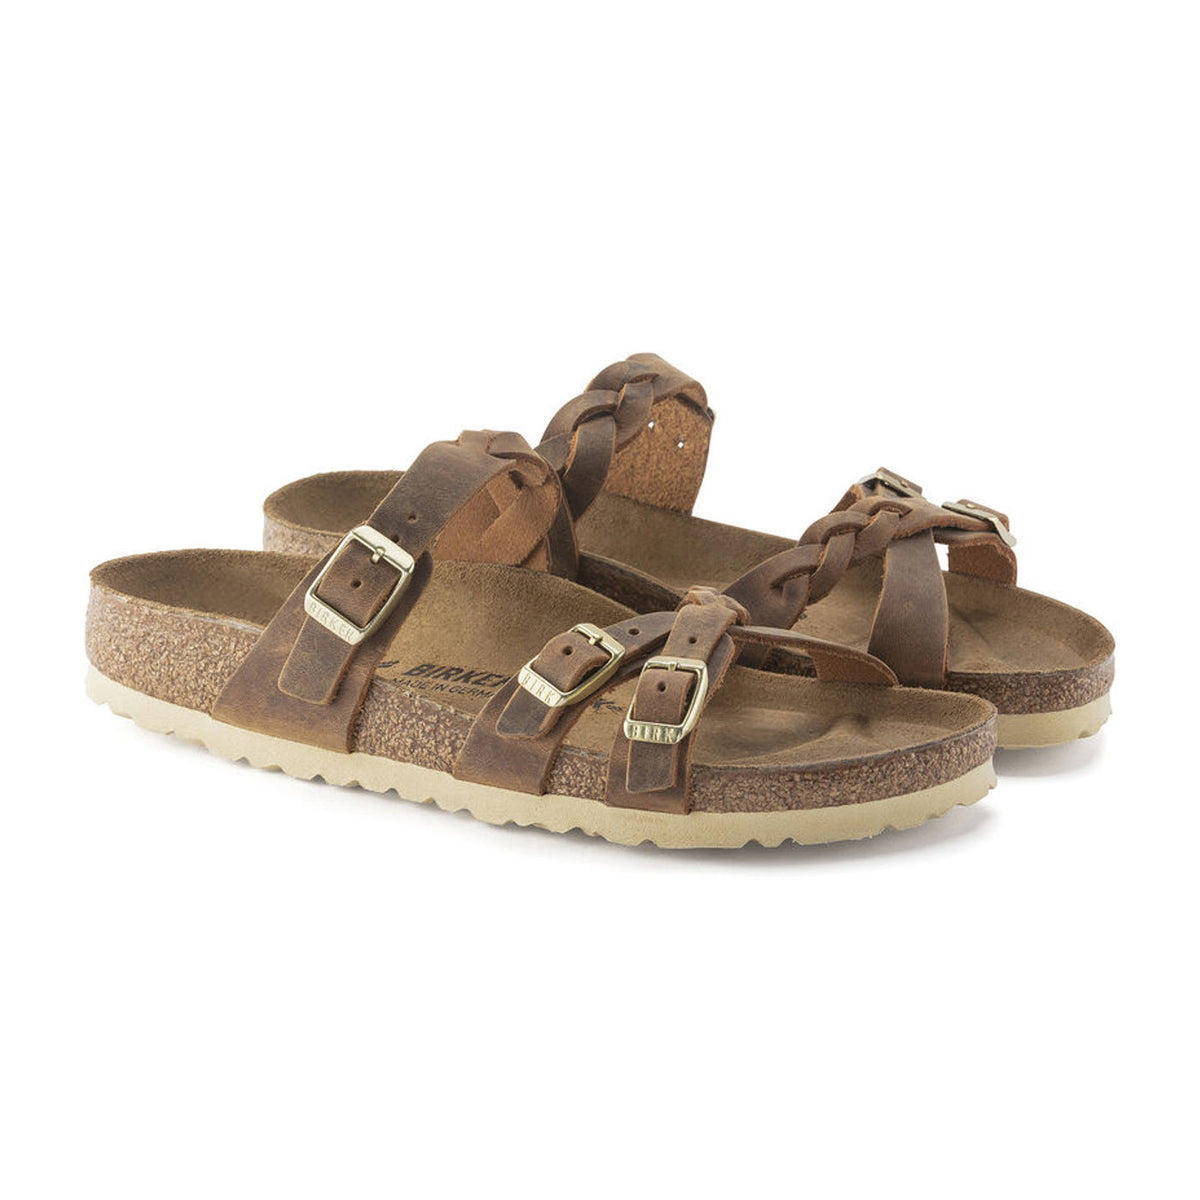 A pair of Birkenstock Franca Braid Cognac - Womens sandals with multiple buckles and cork soles, isolated on a white background.